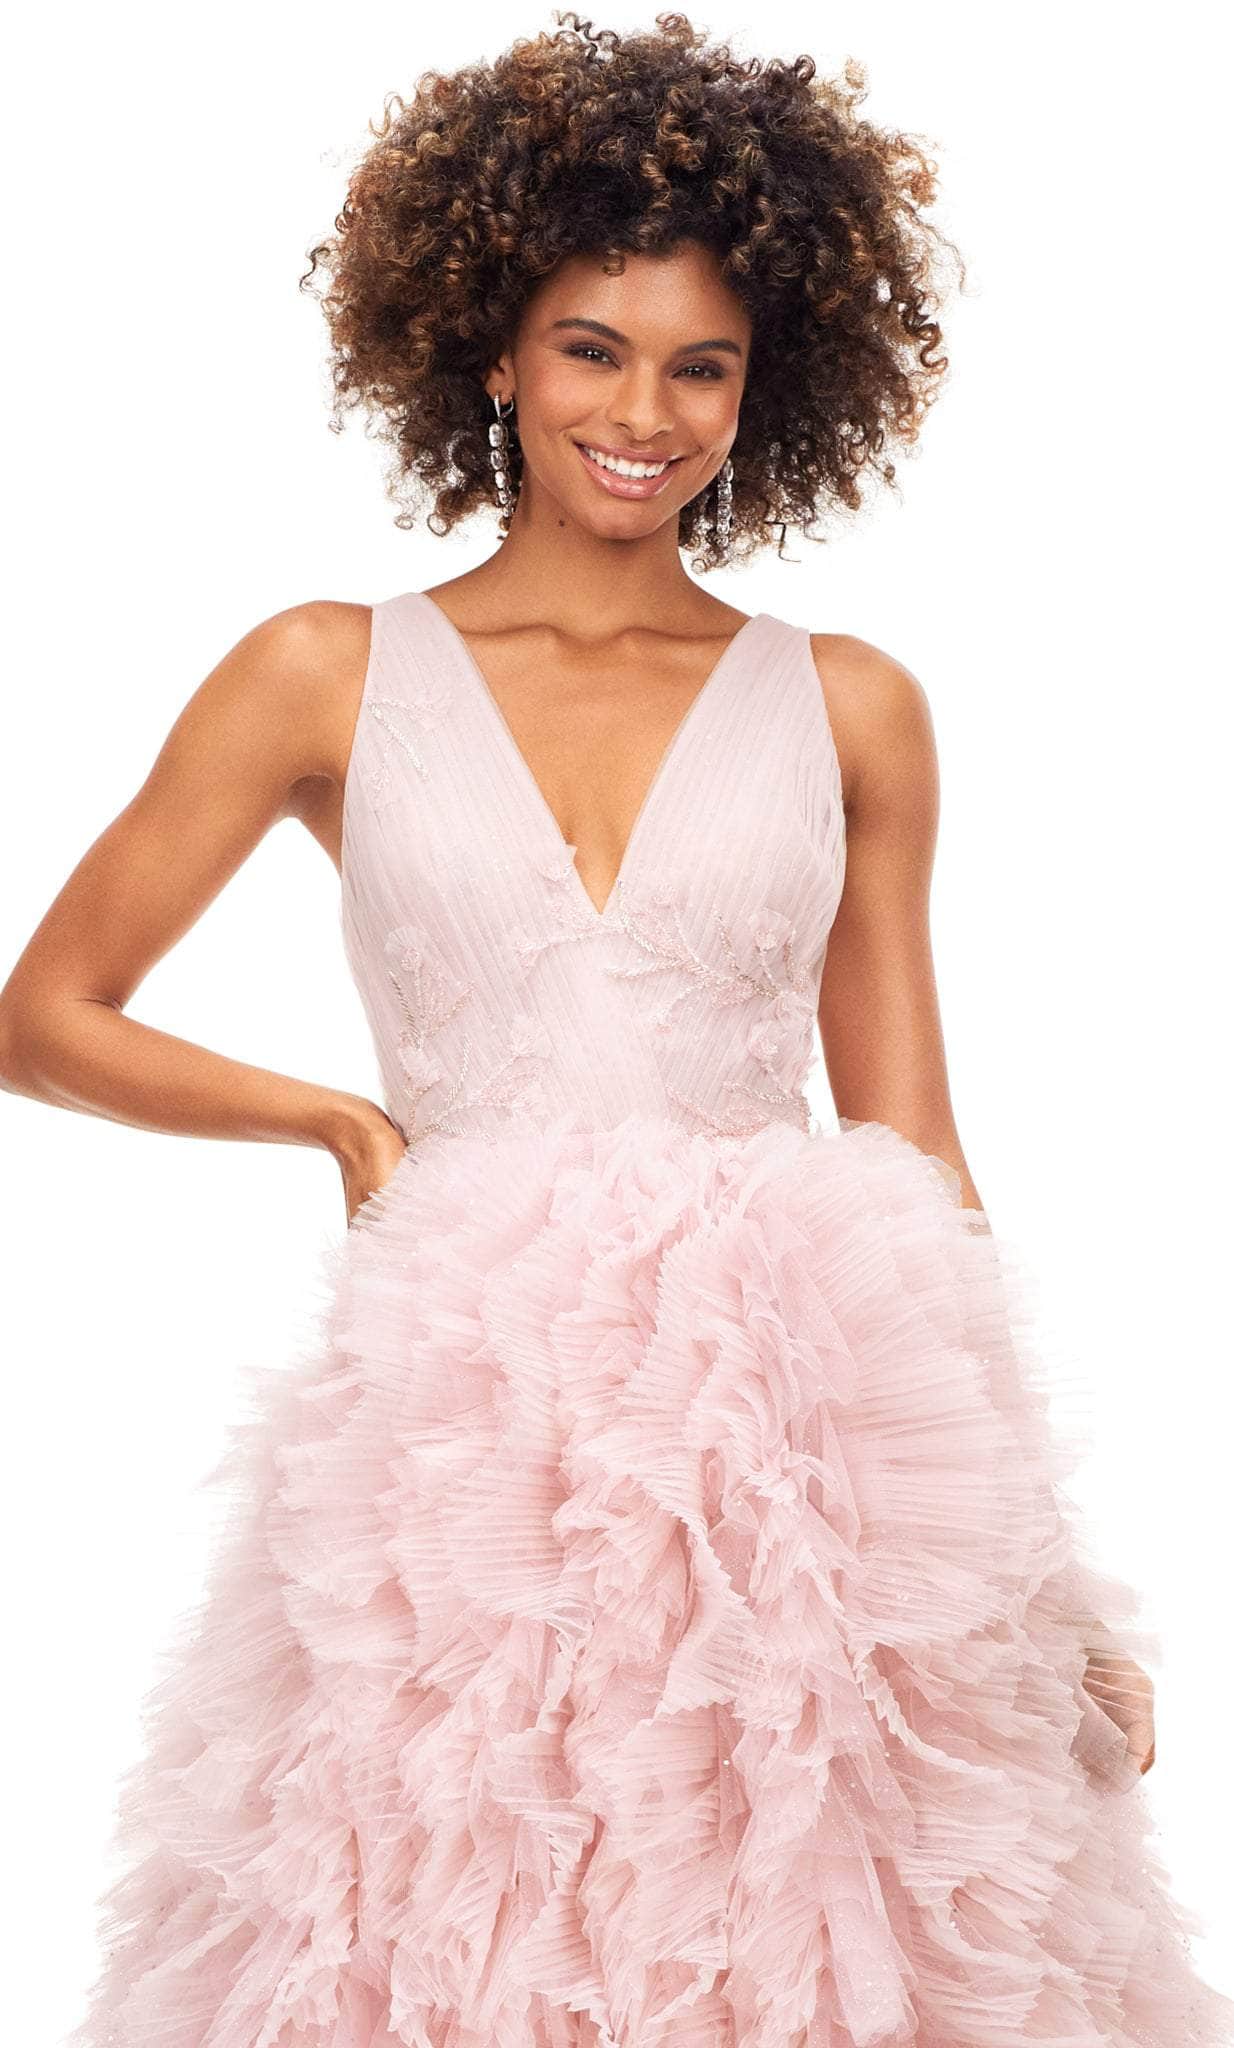 Ashley Lauren 11233 - A-line Ruffled Voluminous Tulle Gown Special Occasion Dress